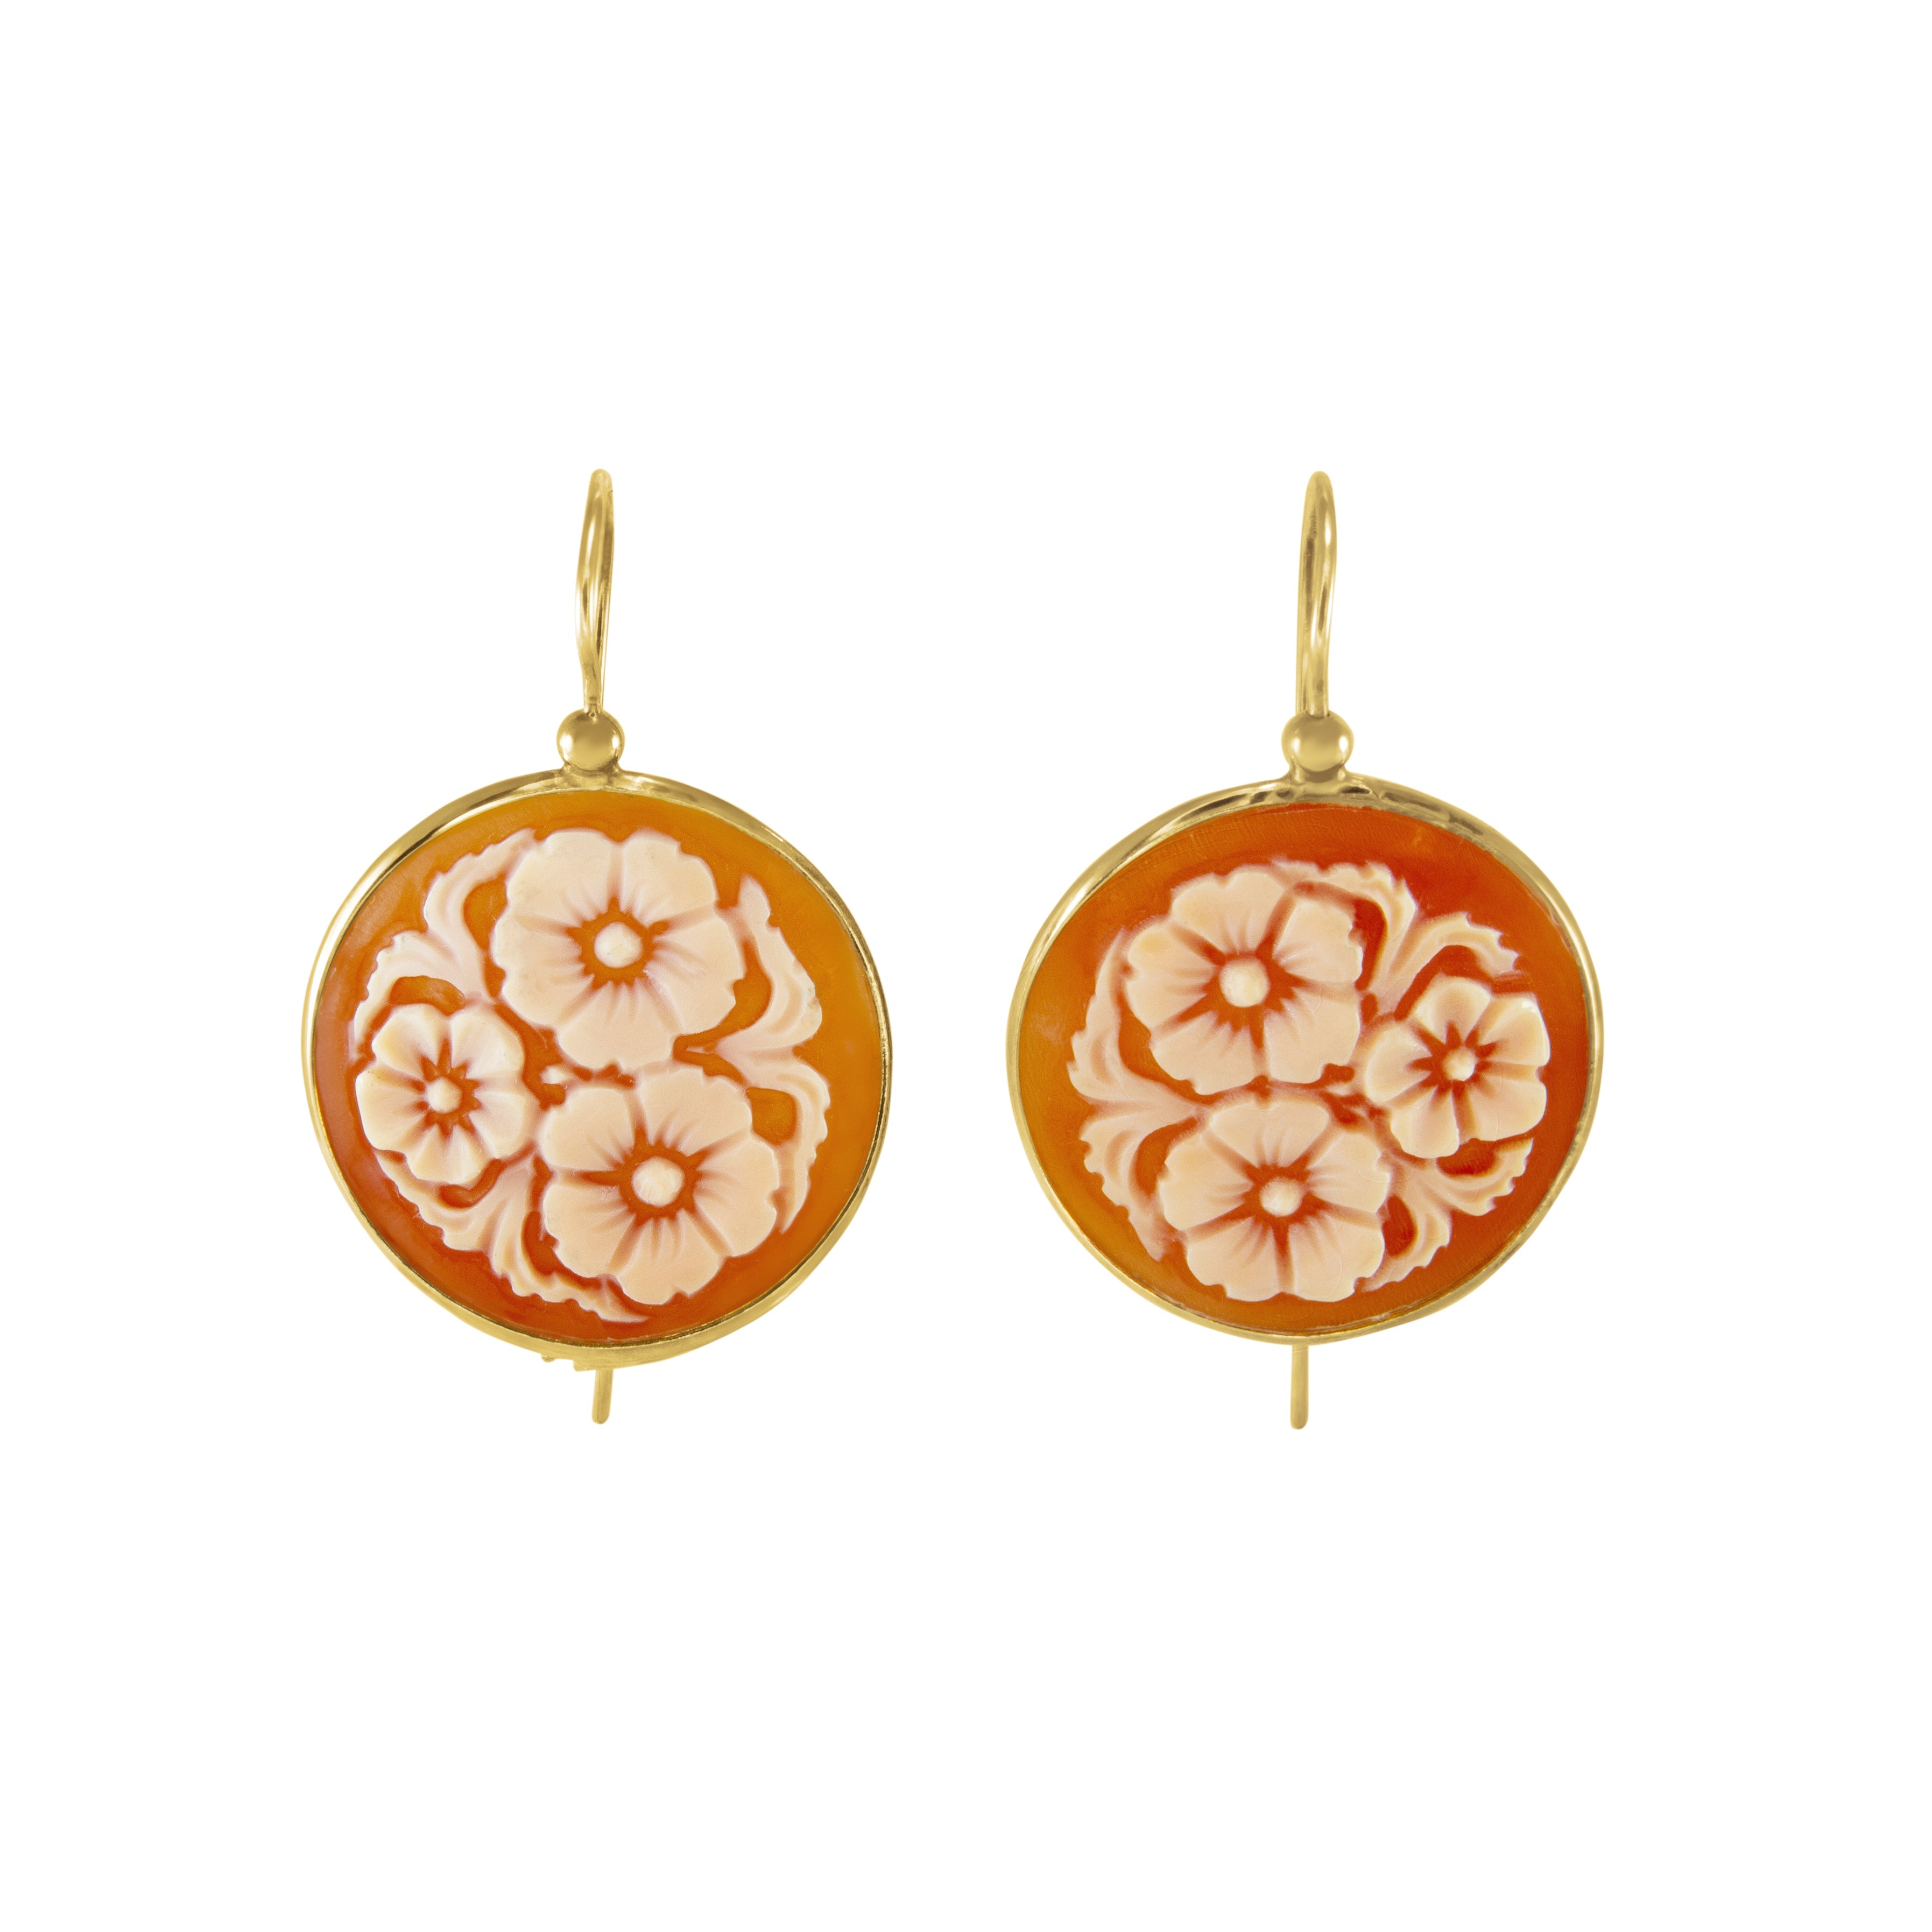 Round Cameo Flower Earrings - Yellow Gold